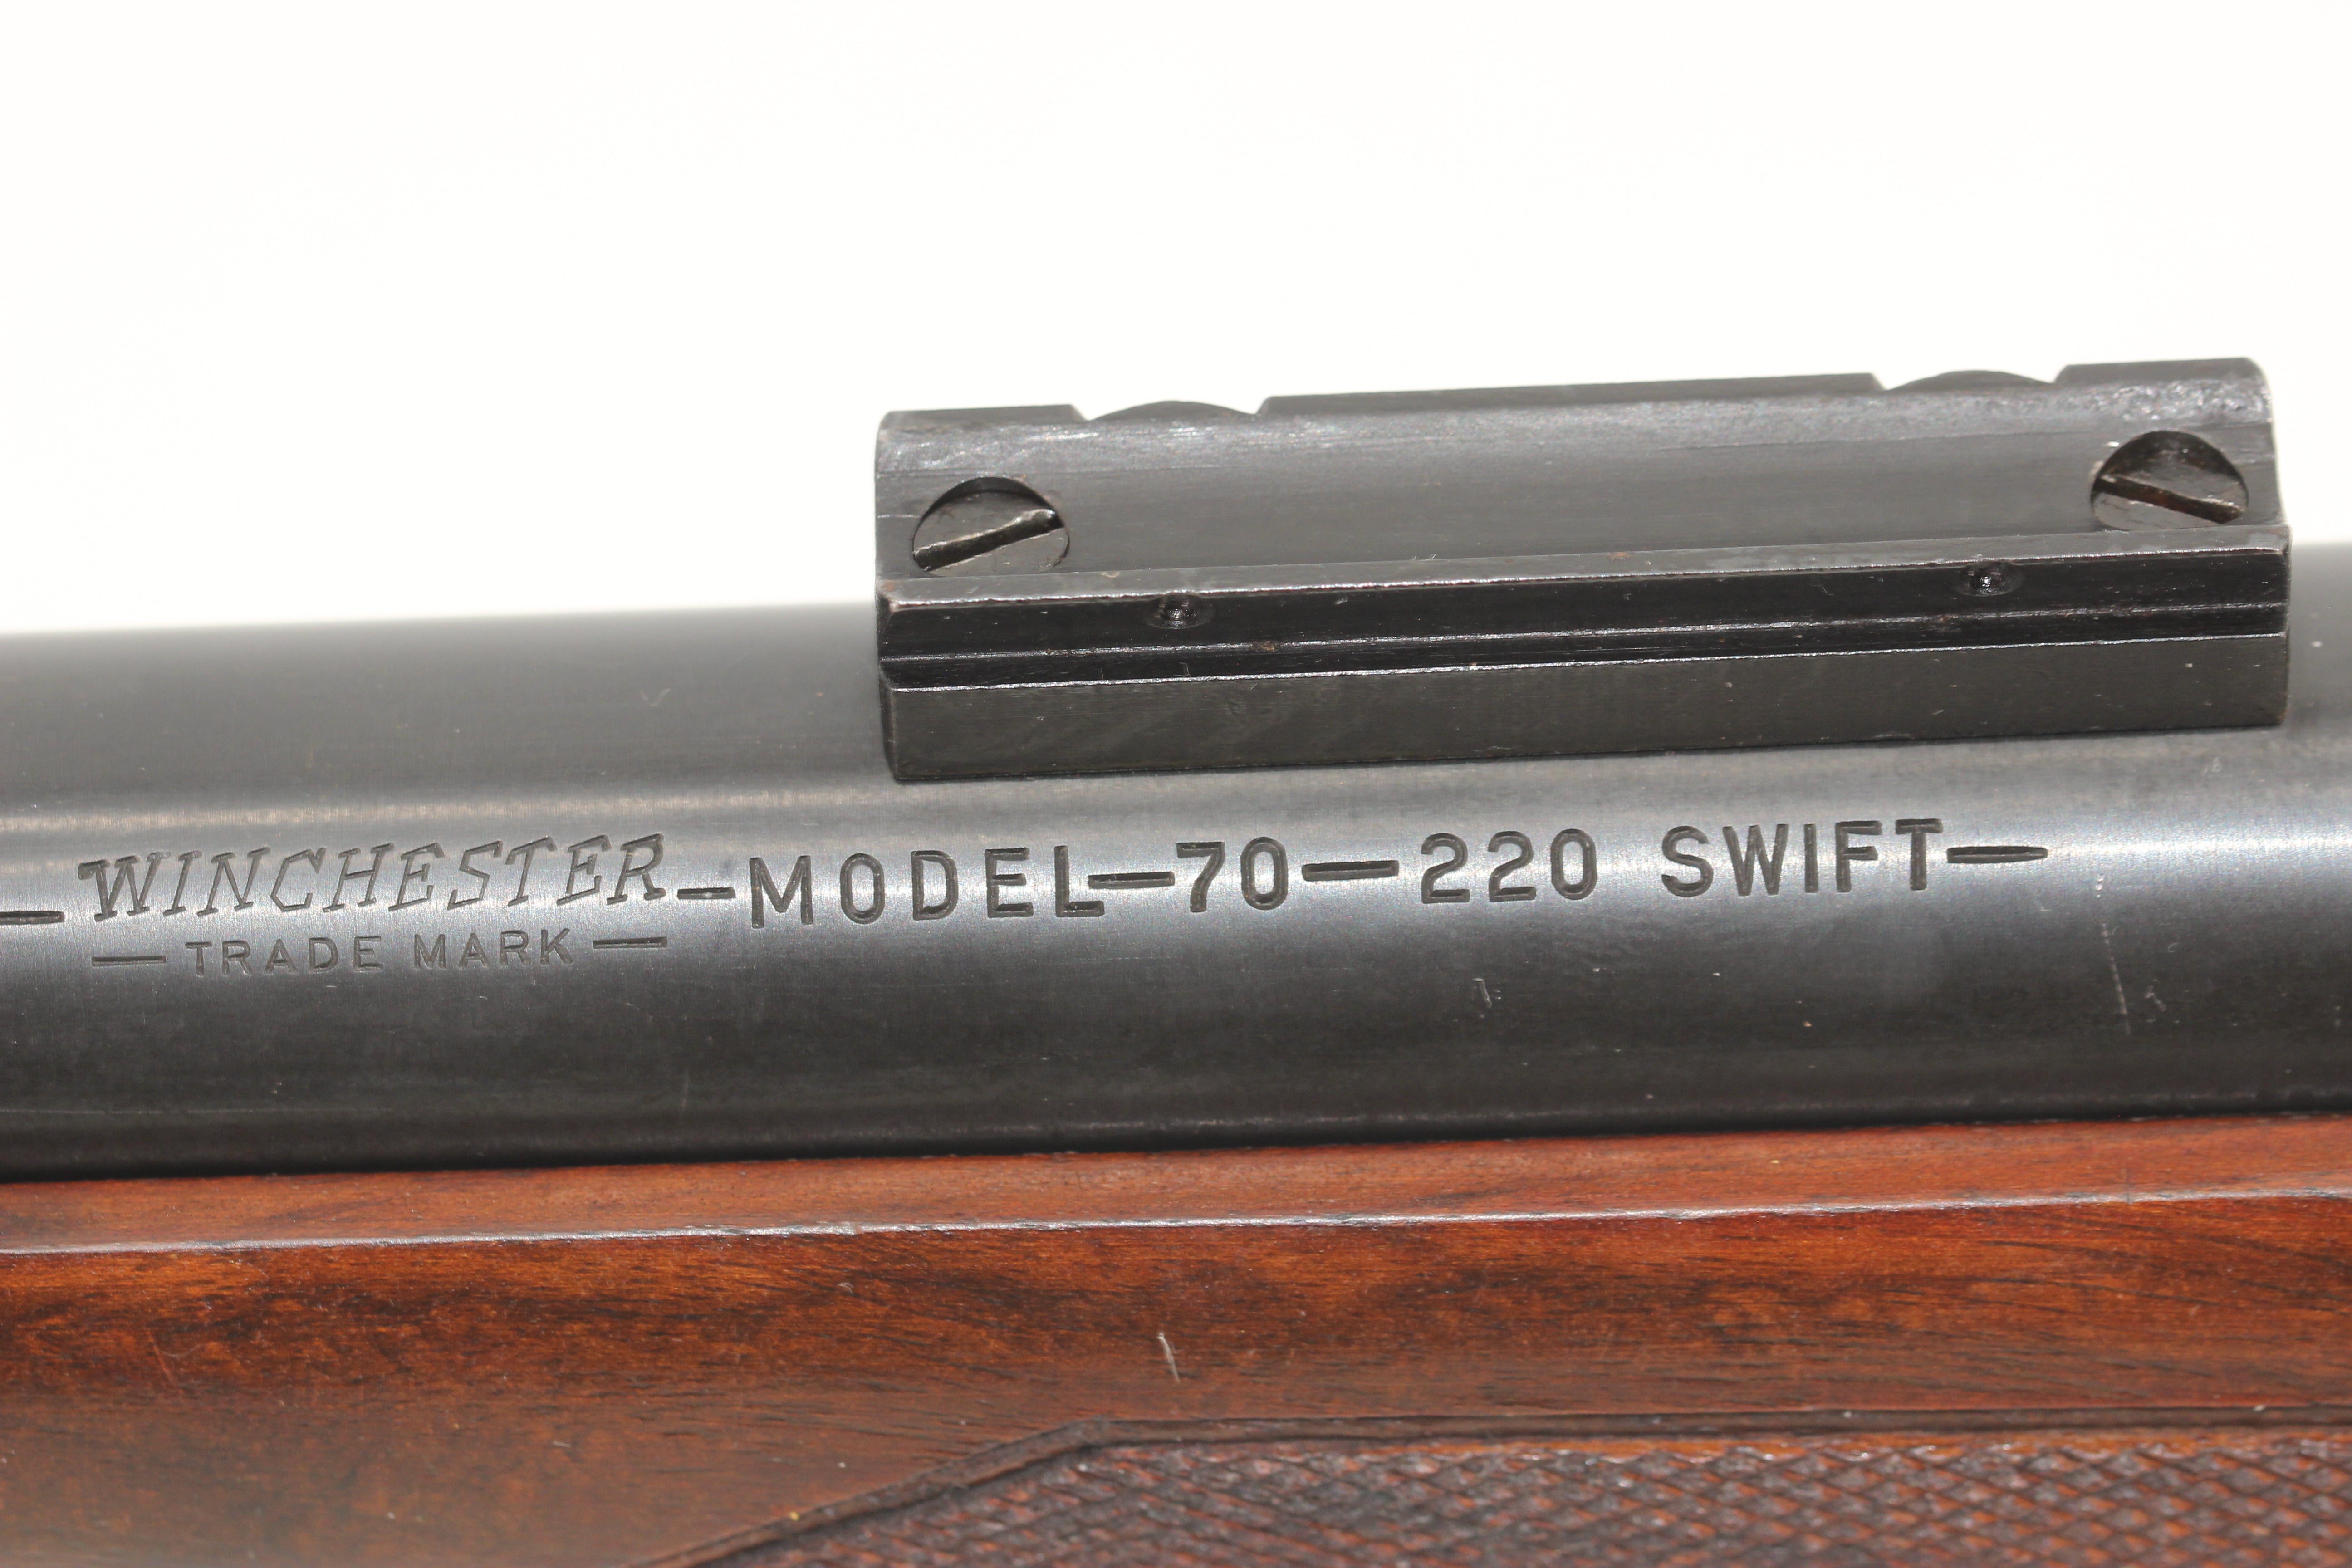 .220 Swift Varmint Rifles - Matched Pair with Sequential Serial Numbers - 1963